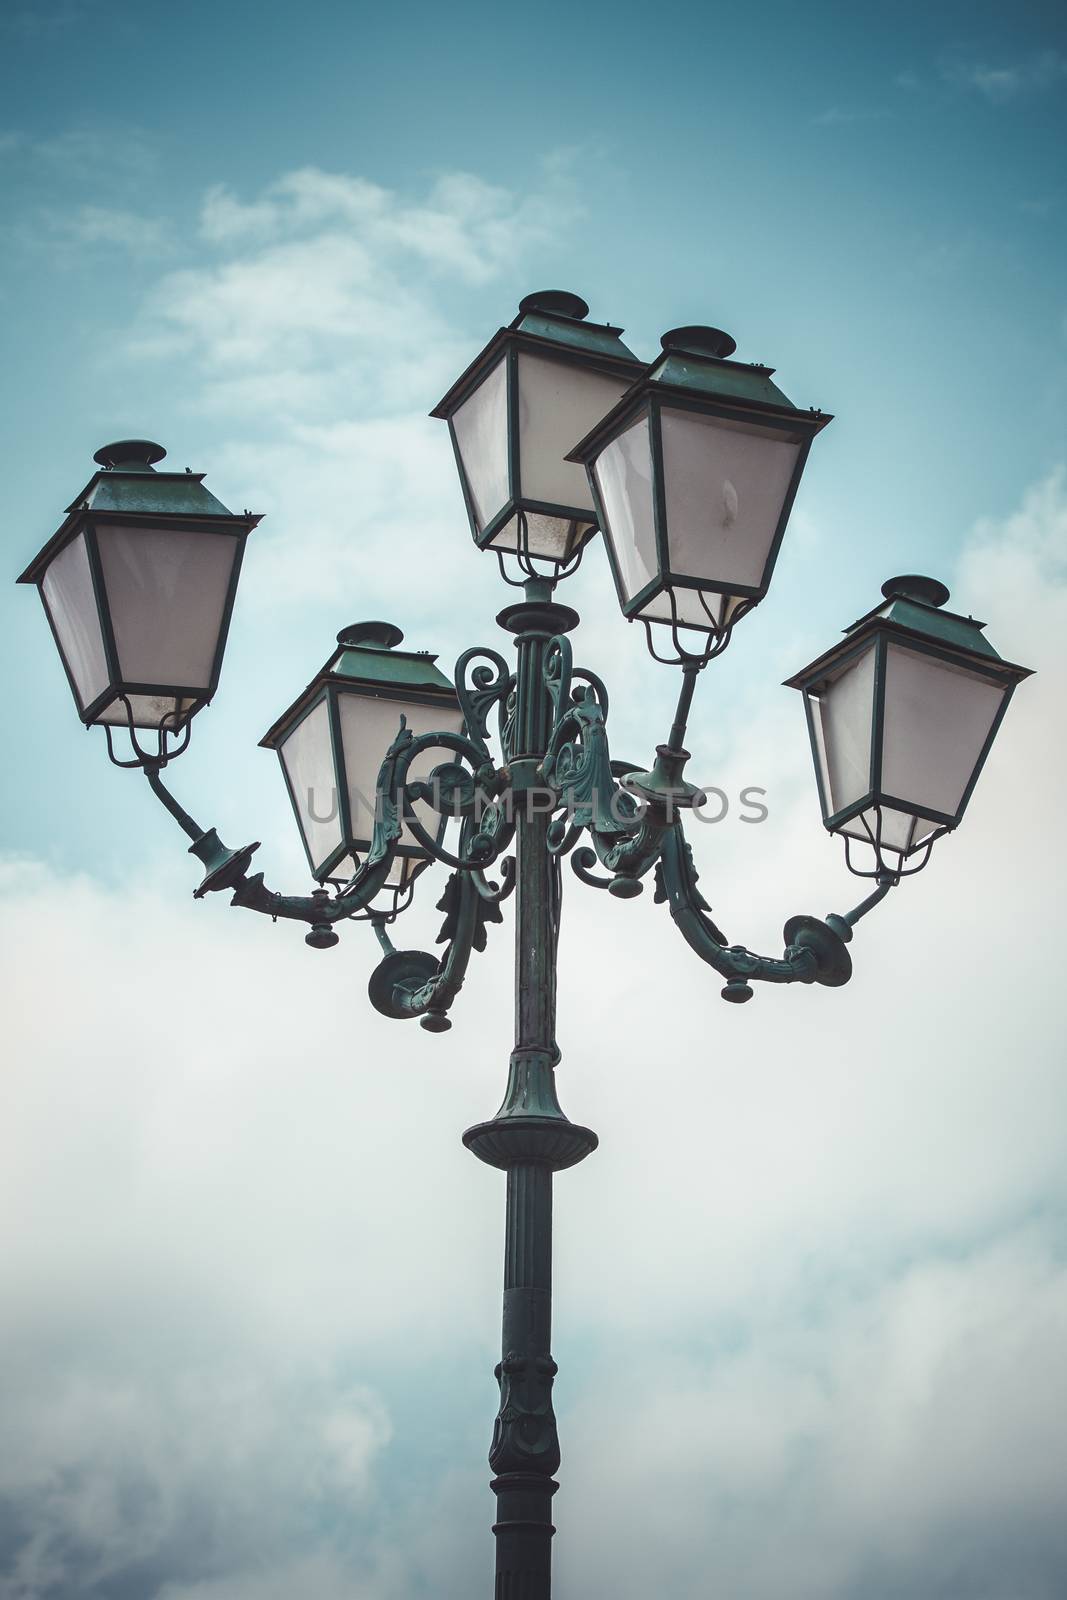 vertical, traditional street lamp with decorative metal flourish by FernandoCortes